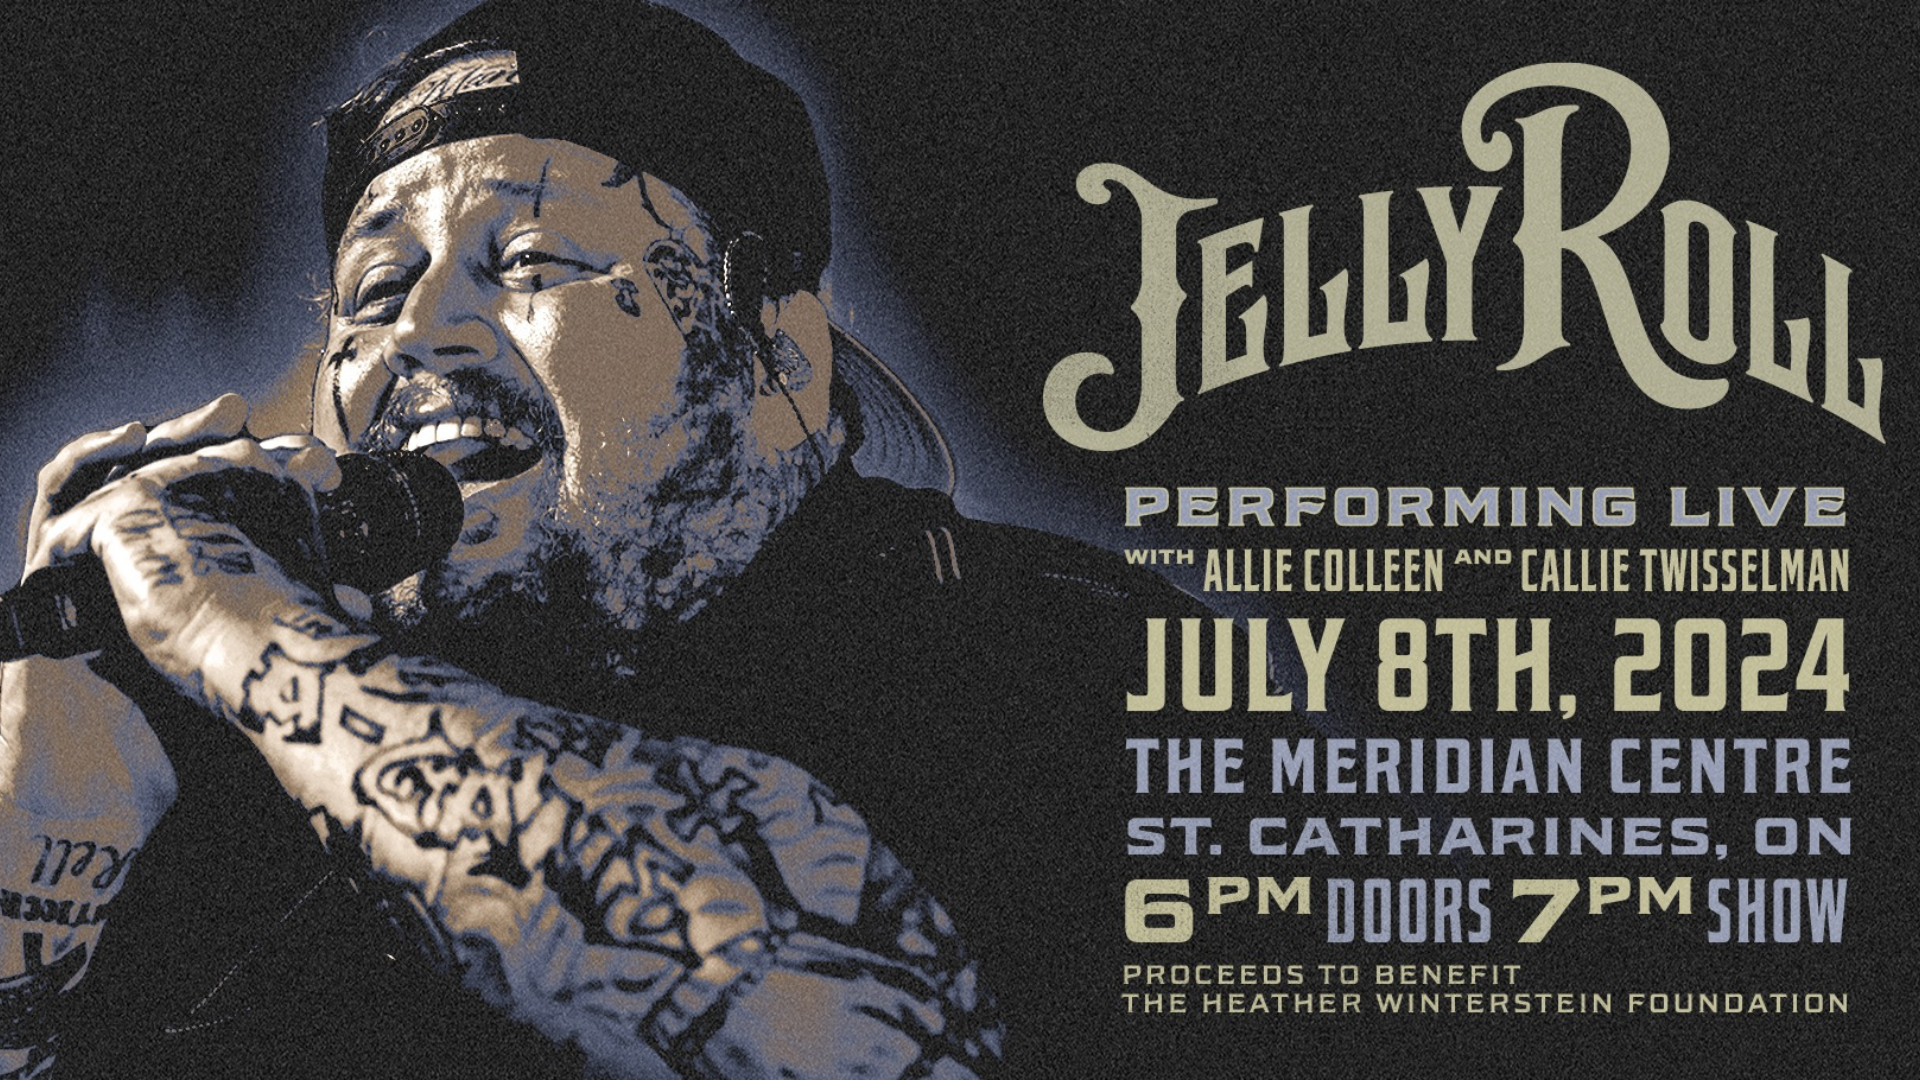 Jelly Roll performing live with Allie Colleen and Callie Twisselman on July 8th, 2024 at the Meridian Centre. Doors open at 6 p.m. Show at 7 p.m. Proceeds to benefit the Heather Winterstein Foundation.